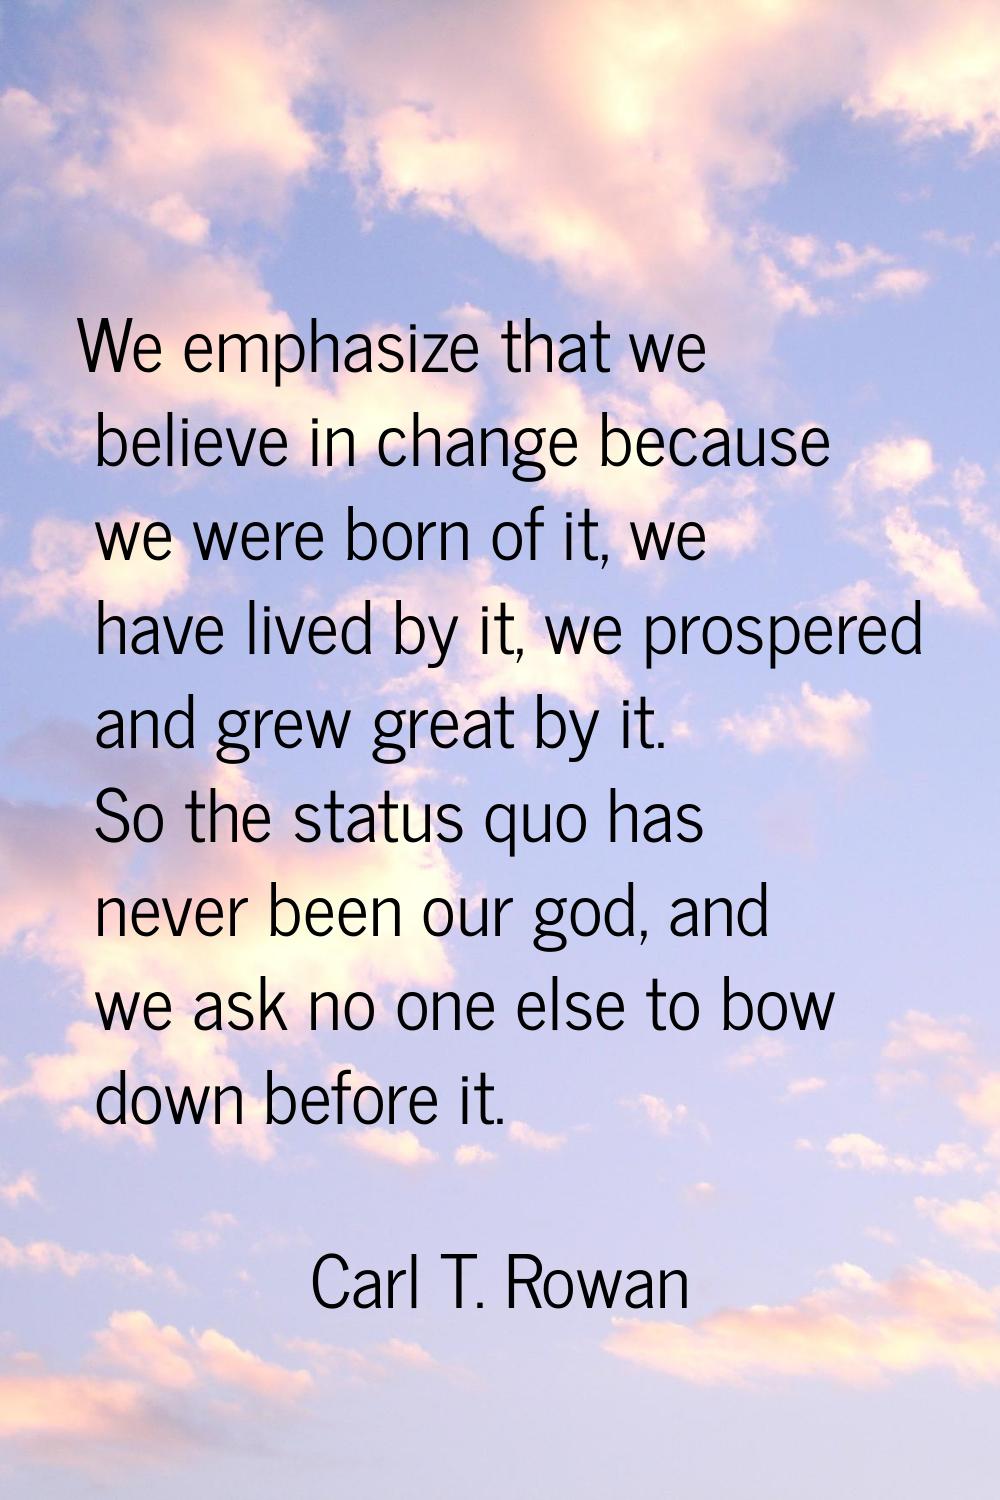 We emphasize that we believe in change because we were born of it, we have lived by it, we prospere